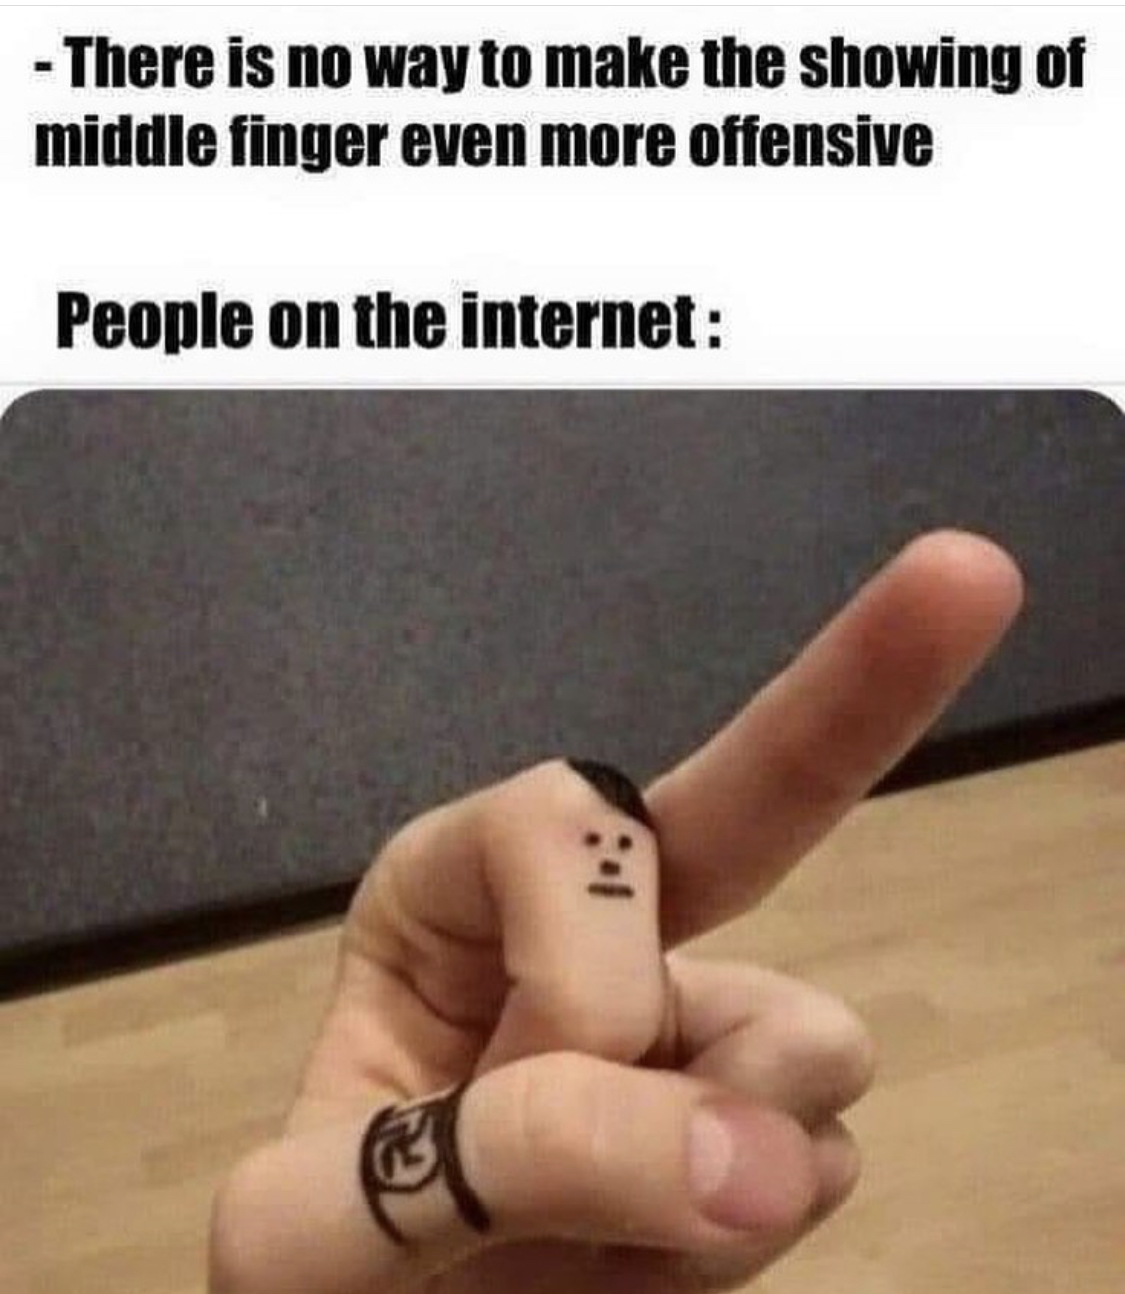 more offensive middle finger - There is no way to make the showing of middle finger even more offensive People on the internet